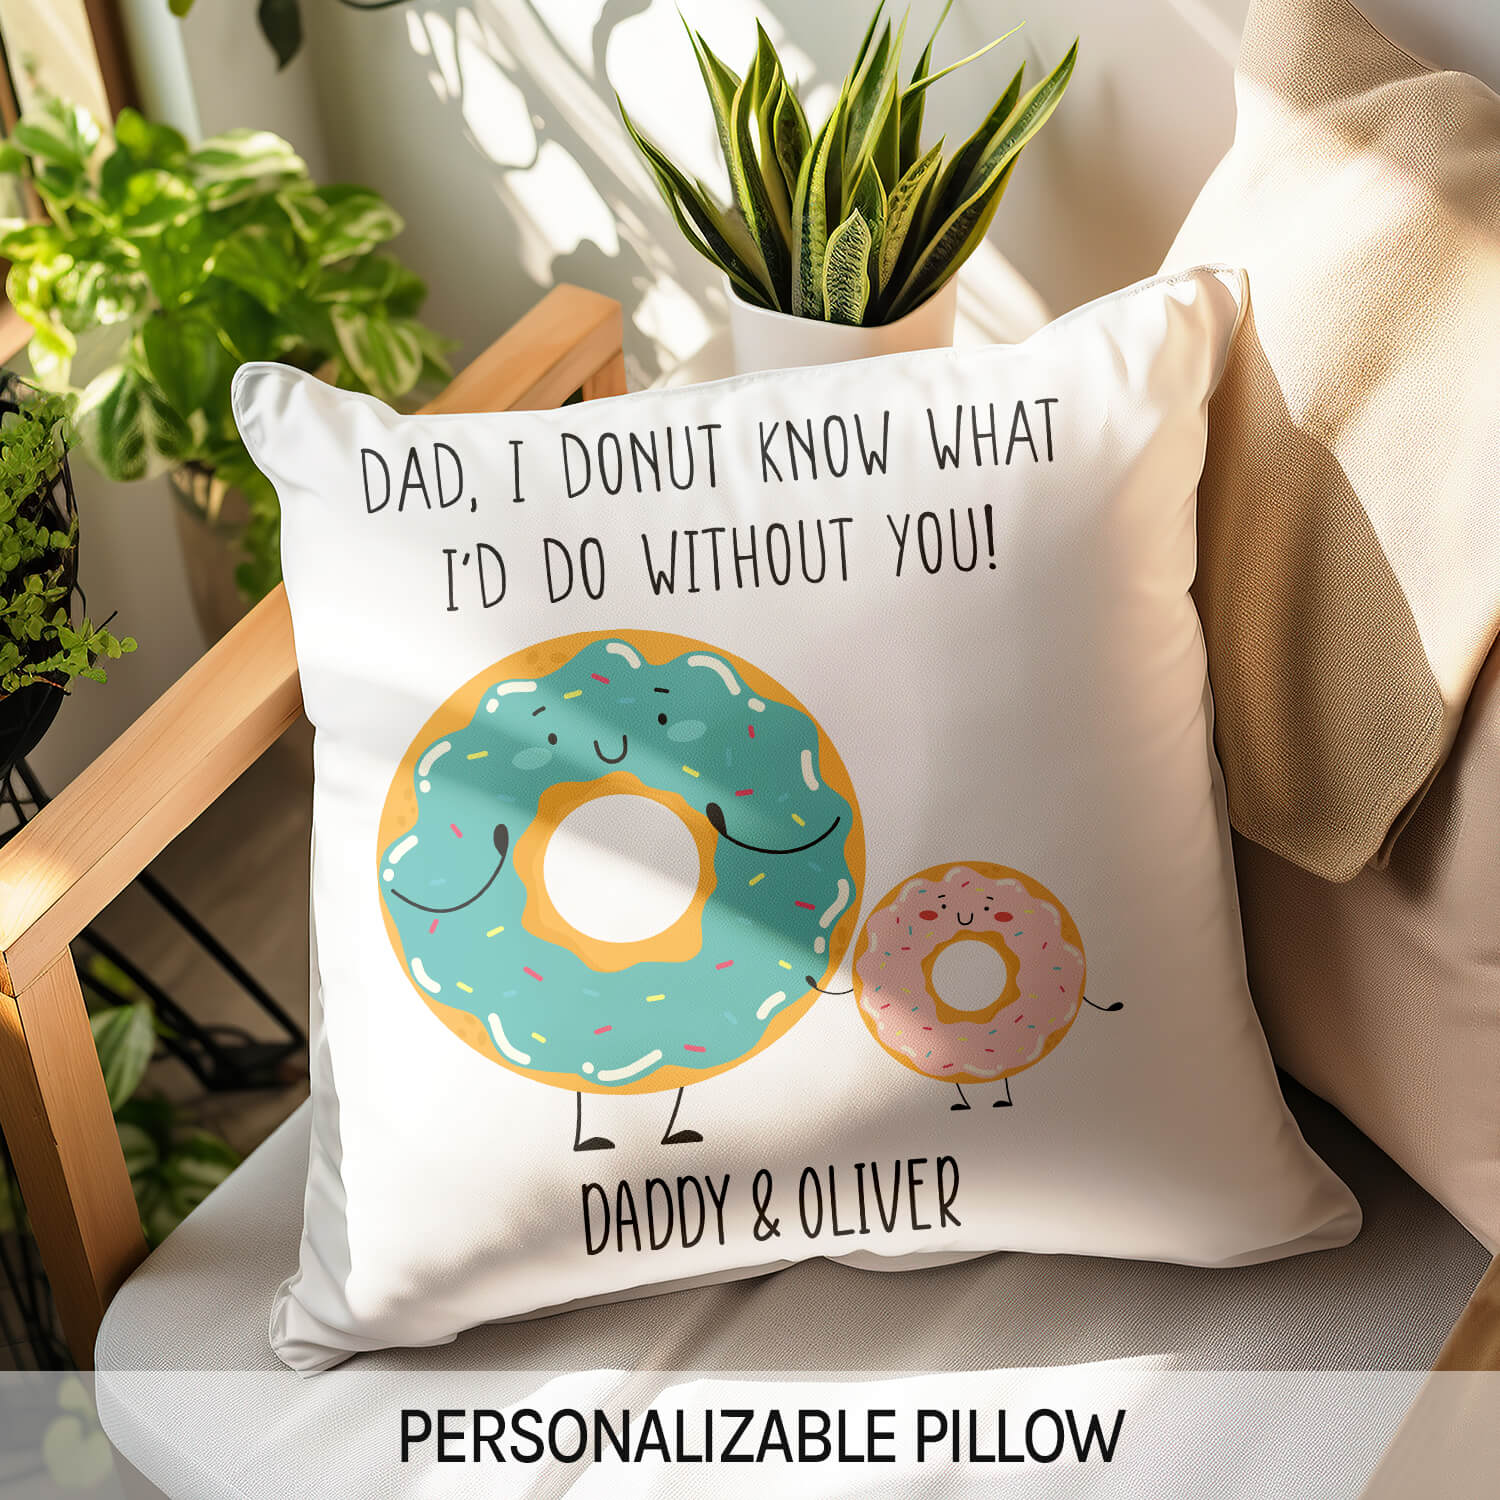 I Donut Know What I'd Do Without You - Personalized  gift For Dad - Custom Pillow - MyMindfulGifts